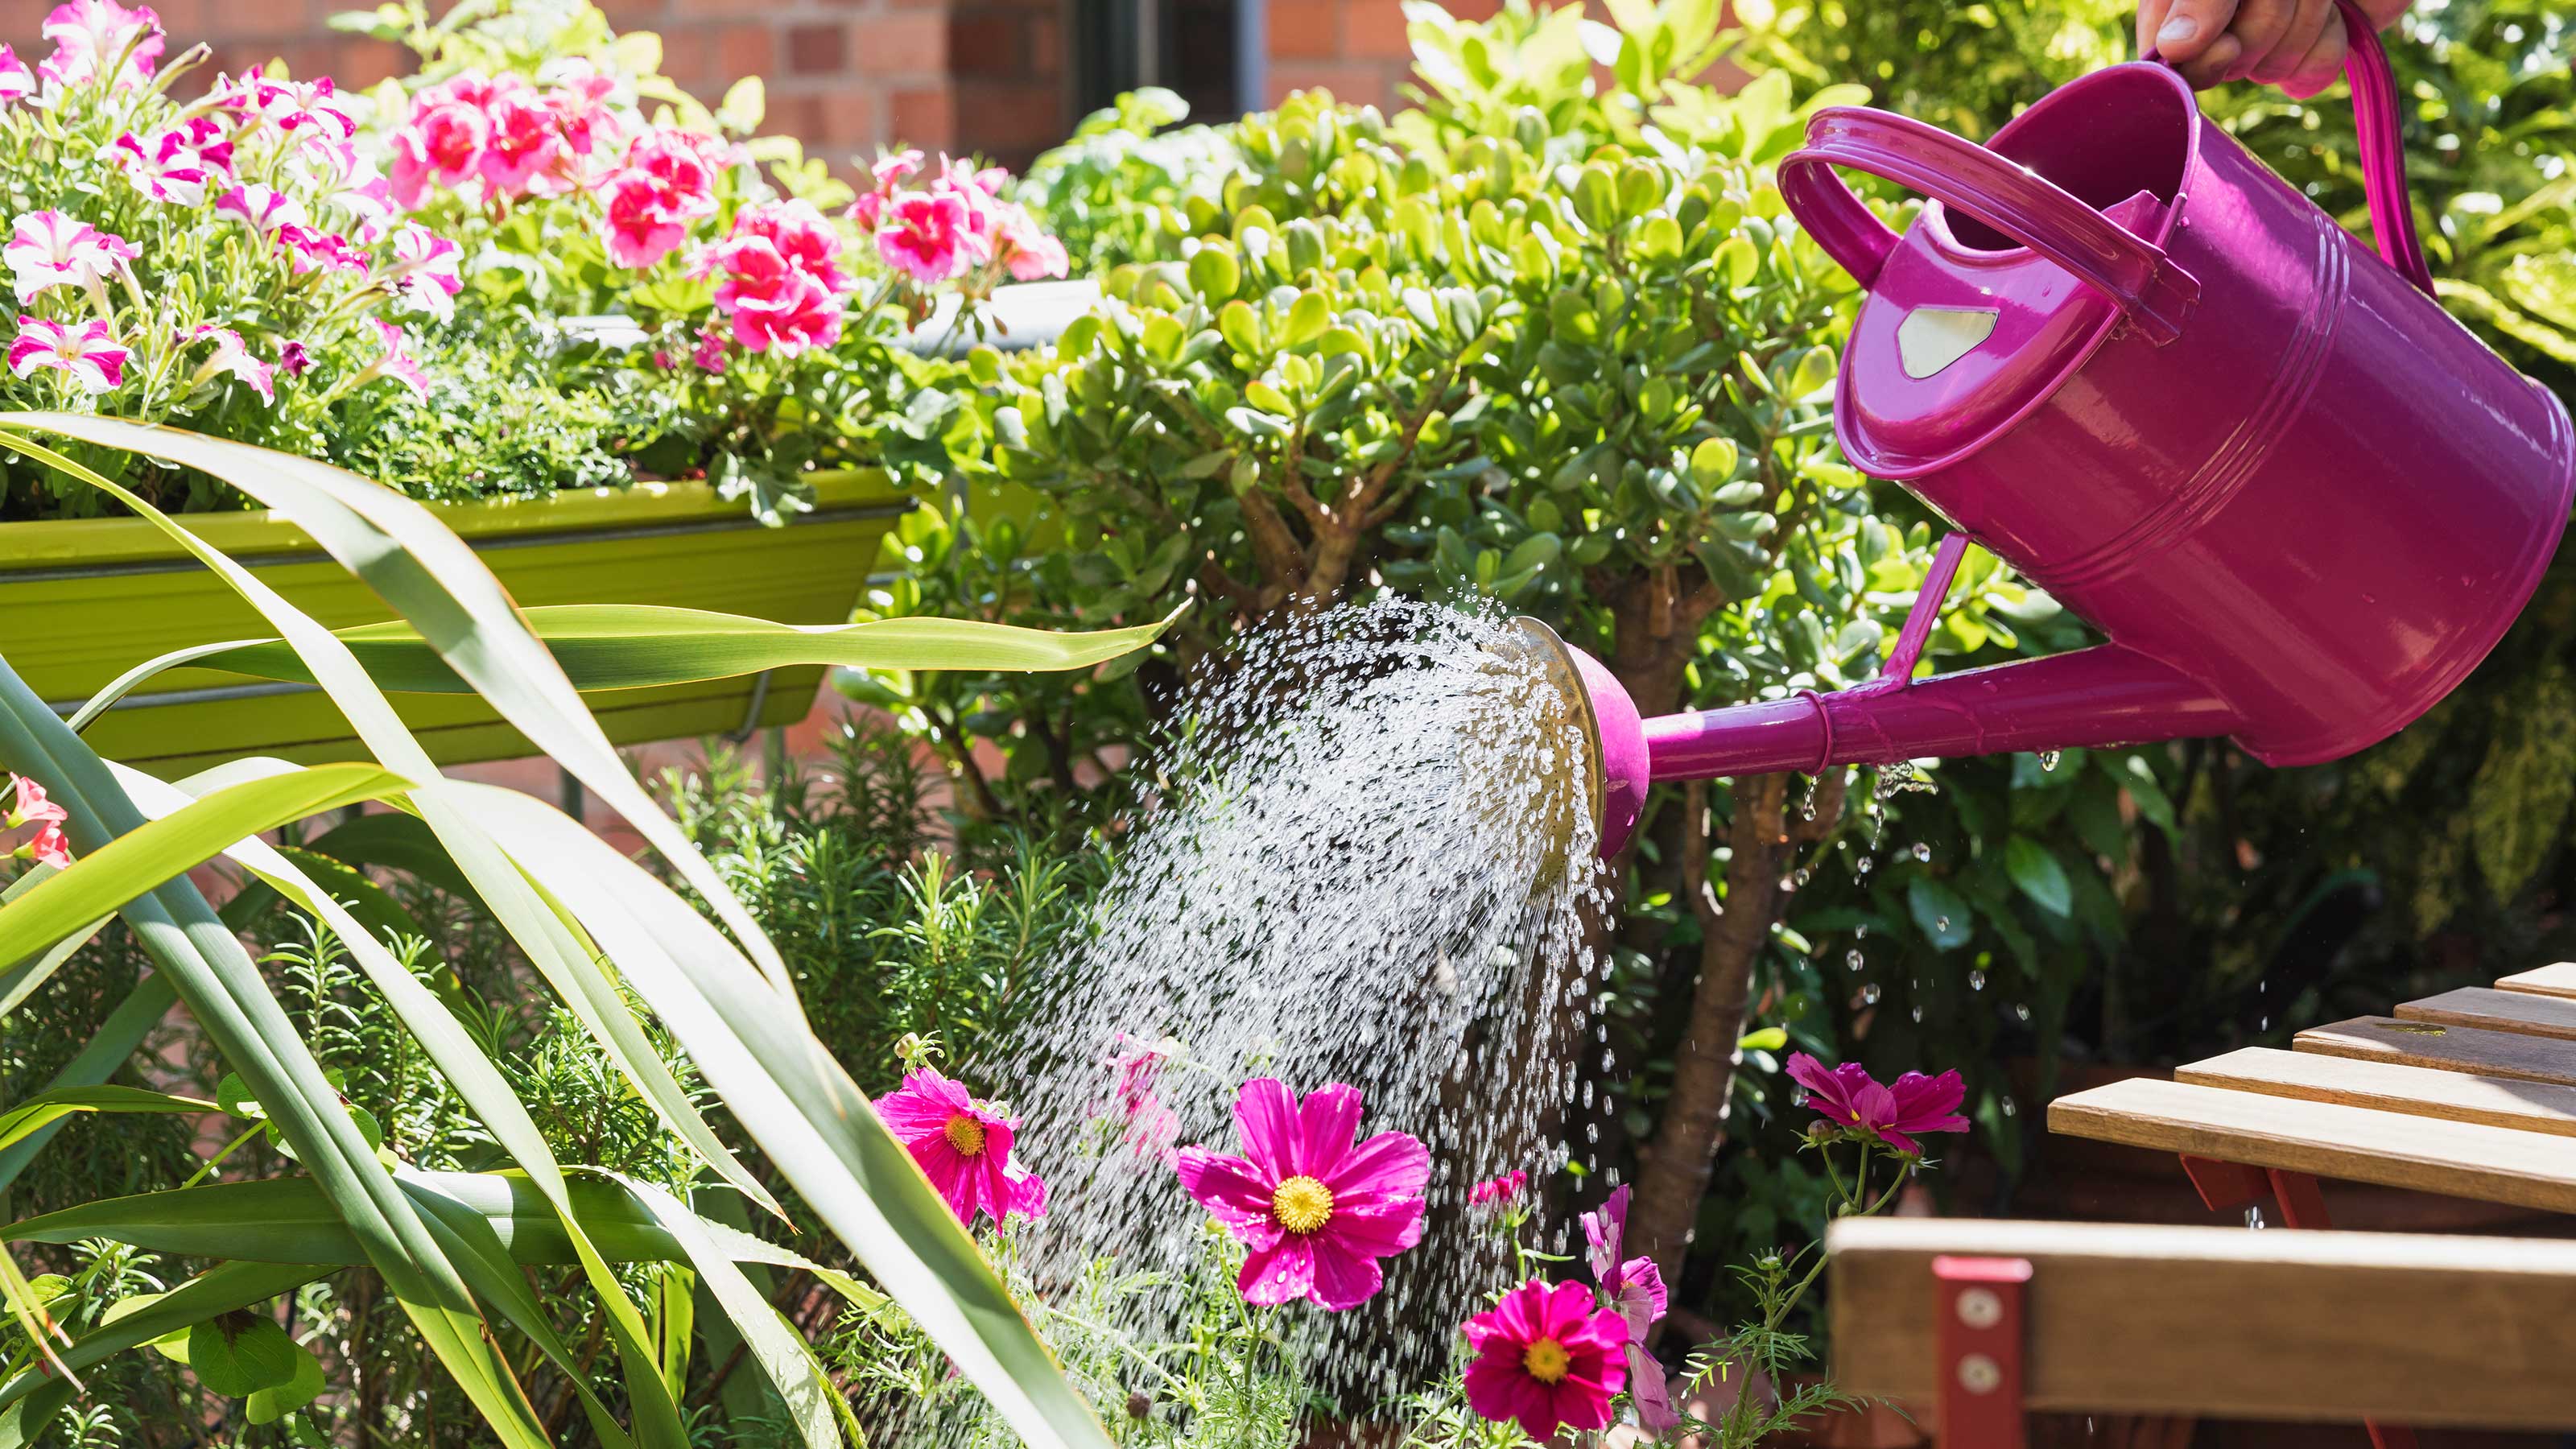 Watering plants: tips on what to do, when to do it, and more | Gardeningetc